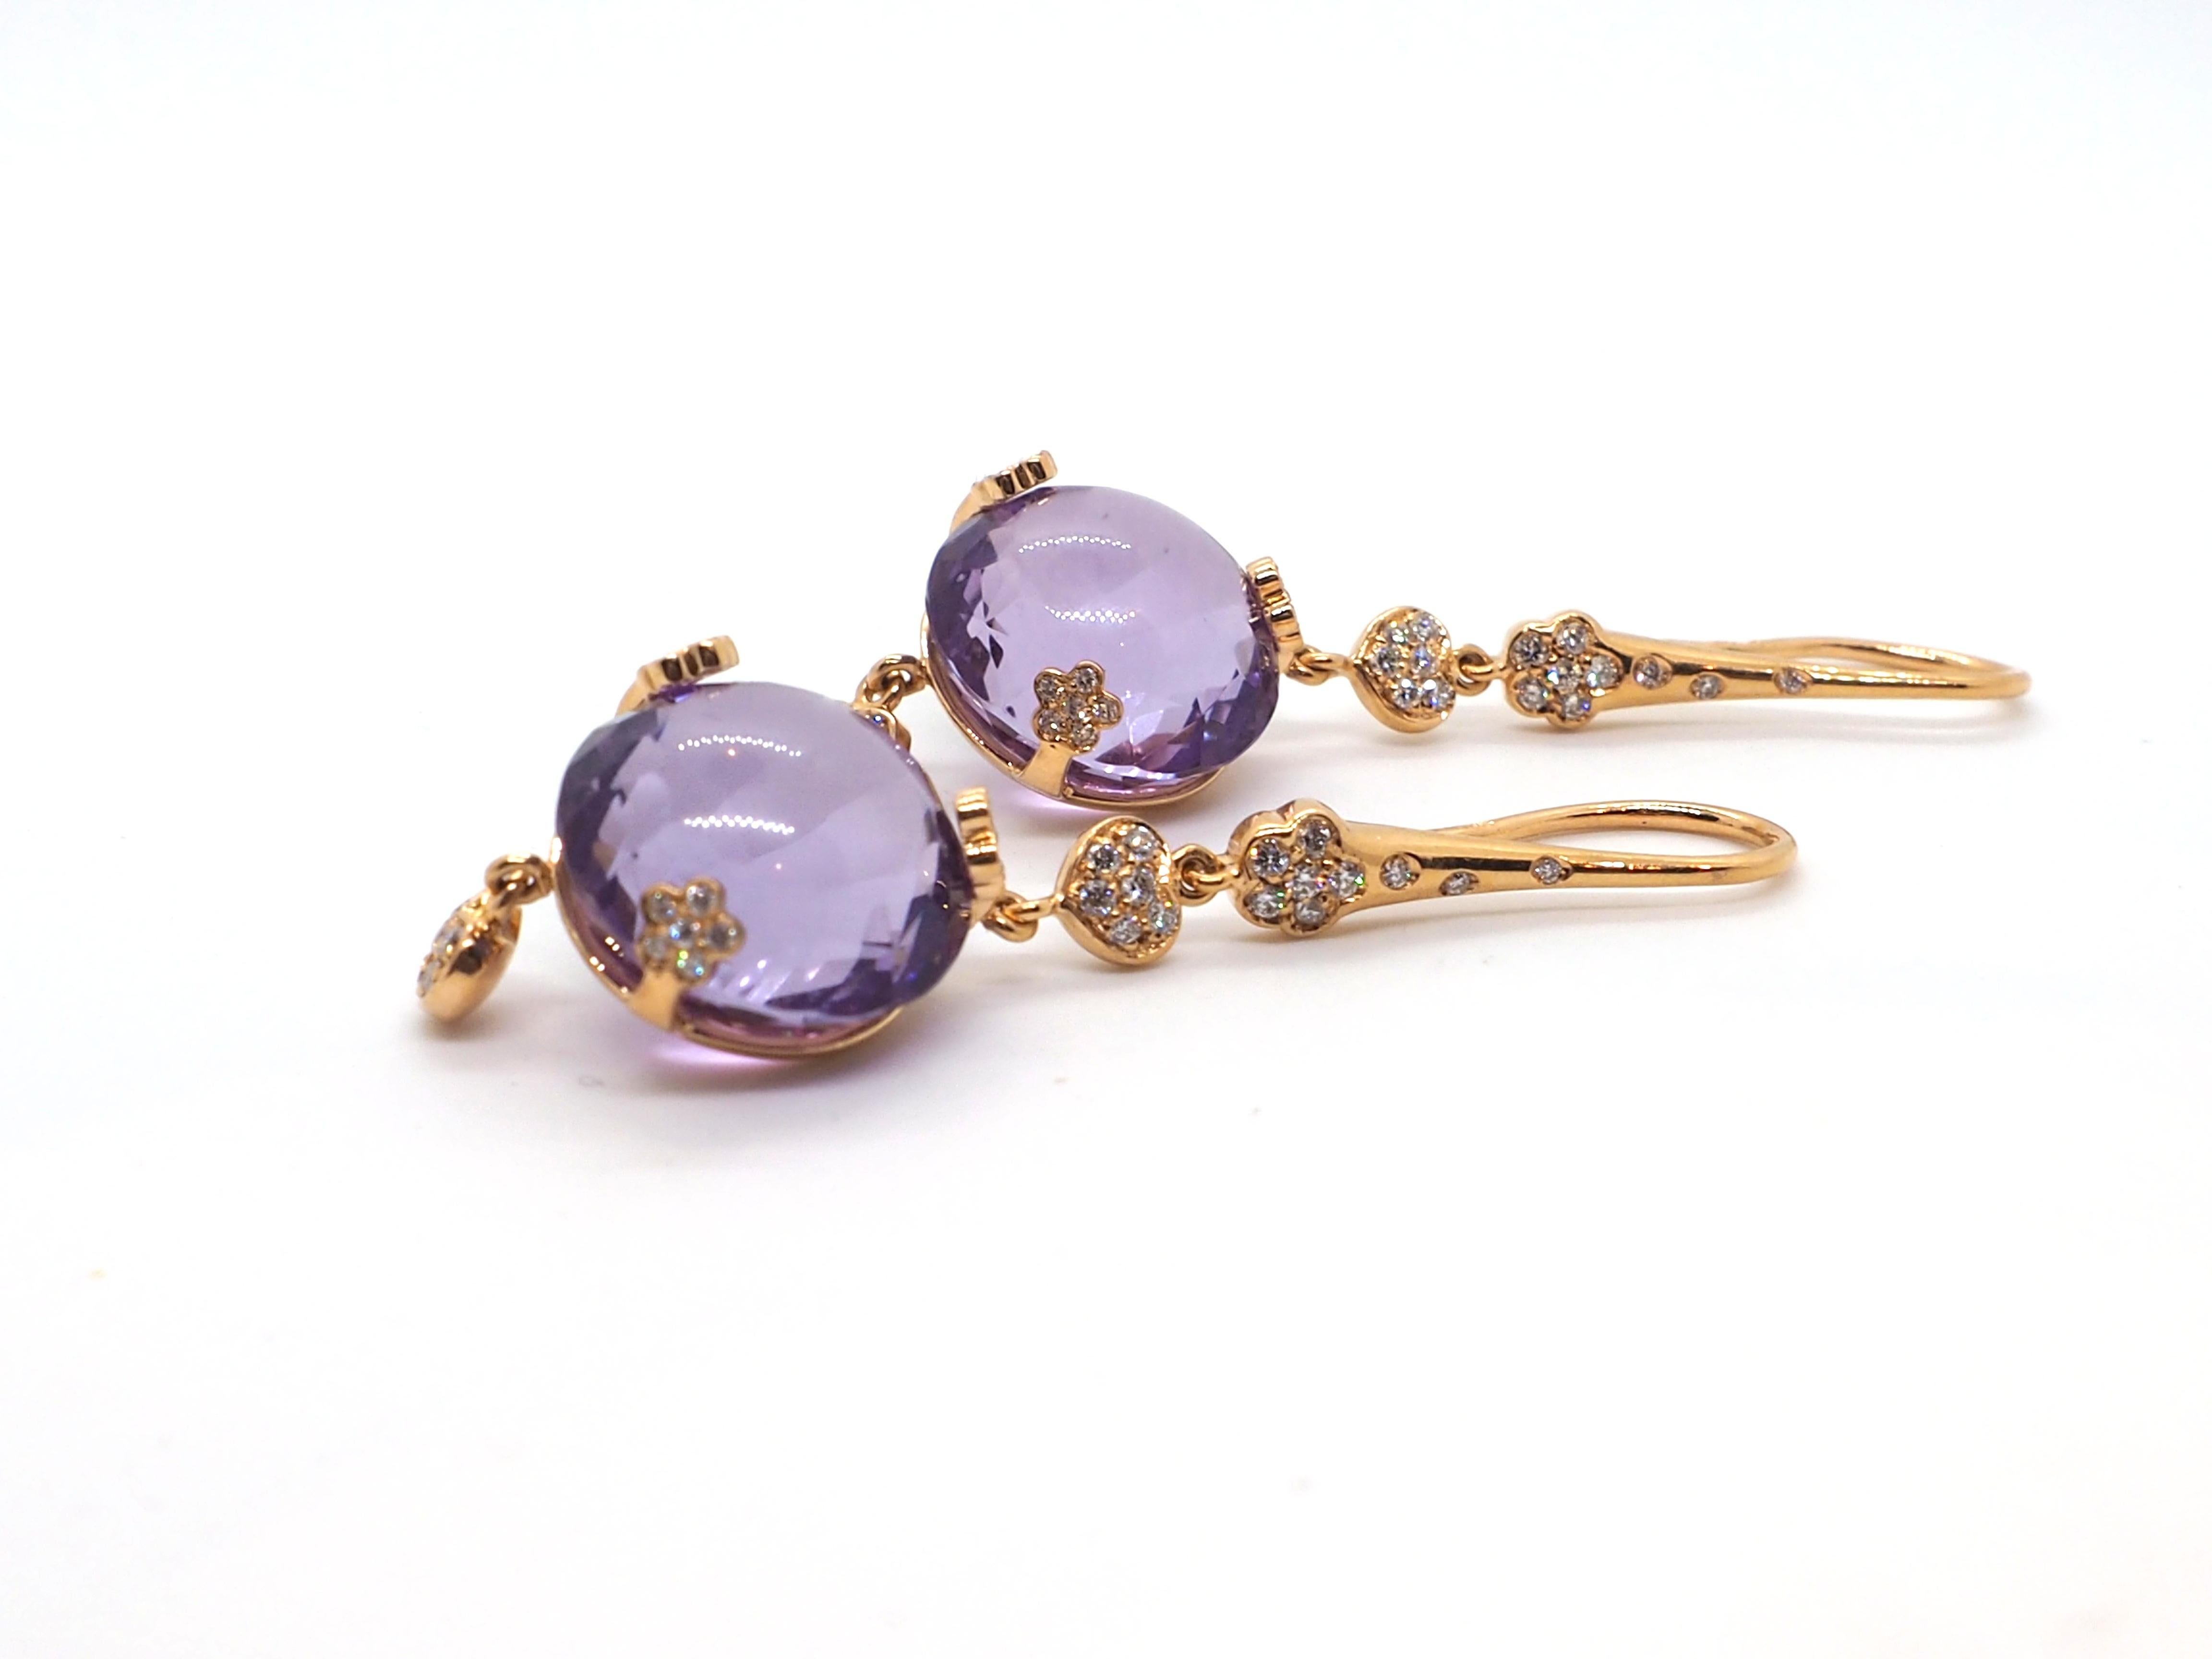 The earrings from the Pasquale Bruni Sissy collection are beautifully crafted and add an elegant and glamorous touch to any outfit. The earrings are made of 18kt rose gold and feature a round amethyst in the center surrounded by sparkling diamonds.